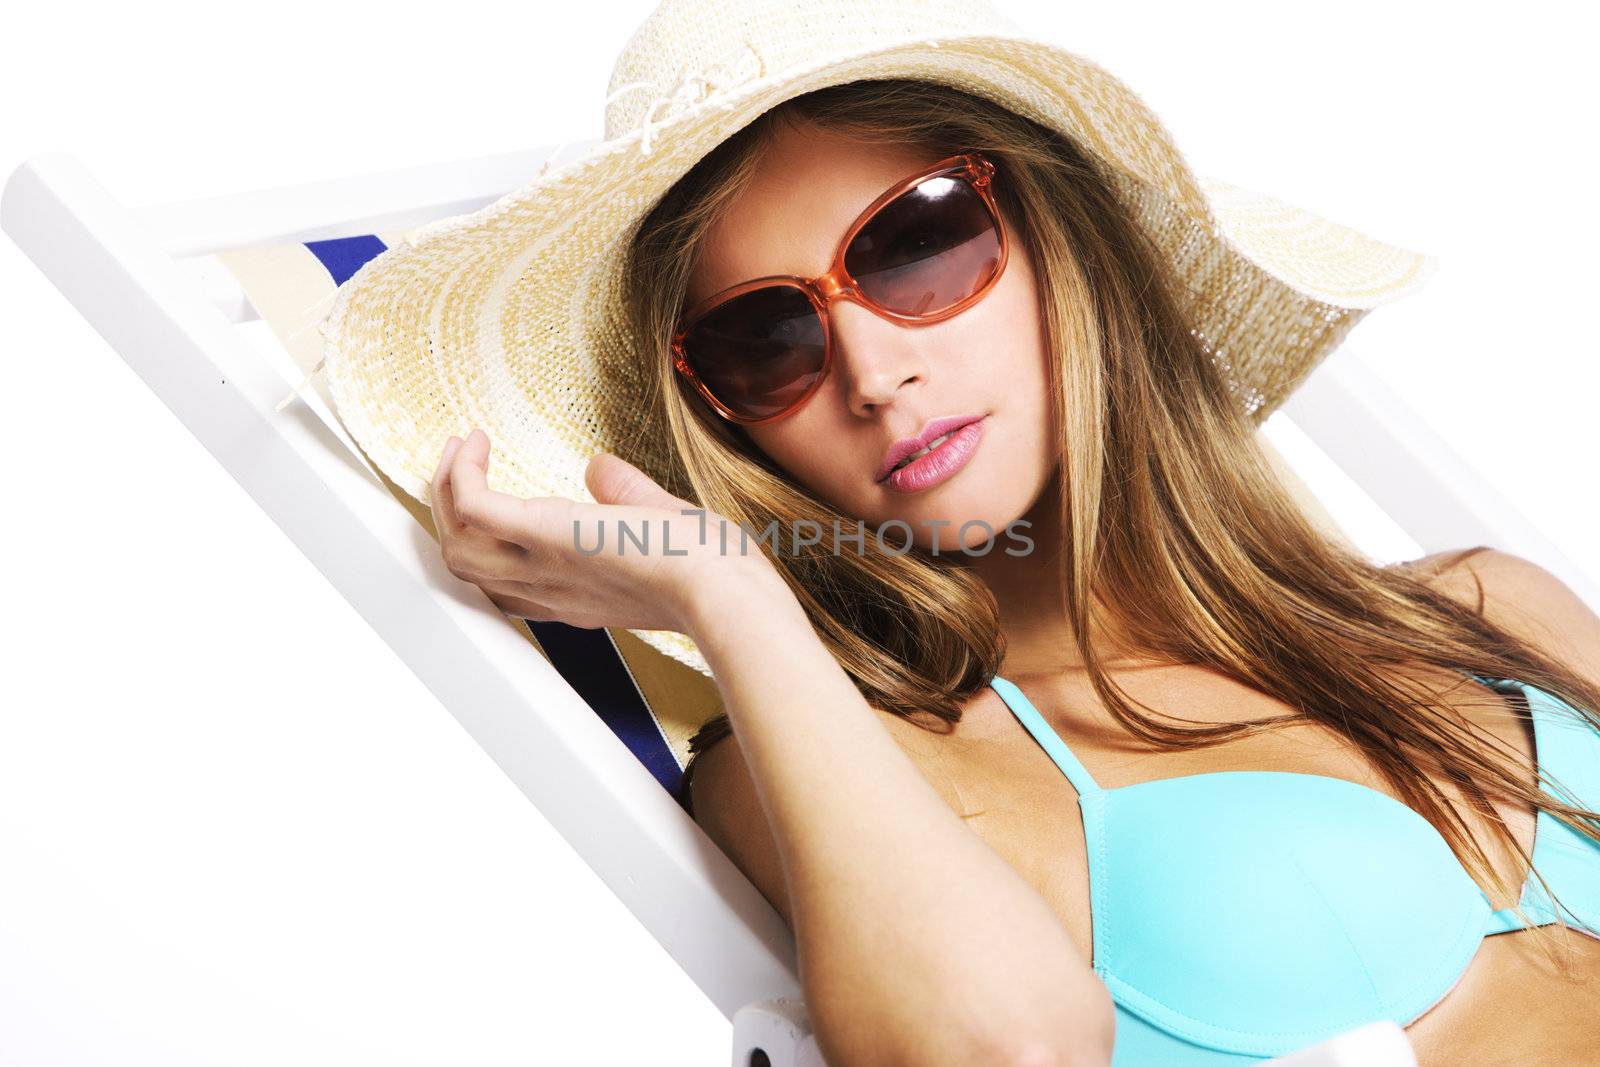 Beautiful young woman relaxing on beach chair, isolated on white background